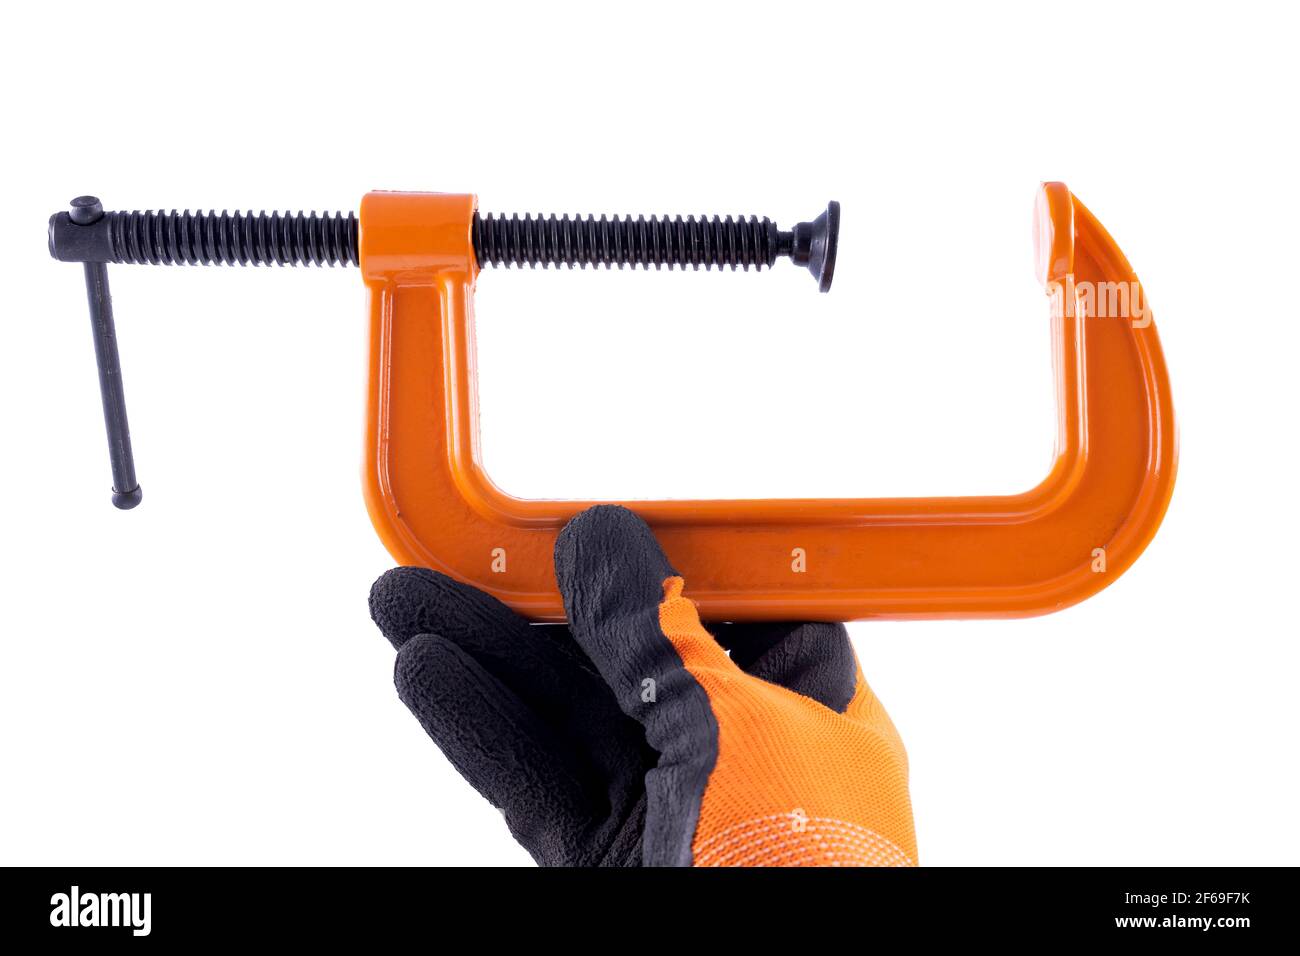 A grip in the hand of a carpenter. Accessories for gluing in a gloved hand. Light background. Stock Photo